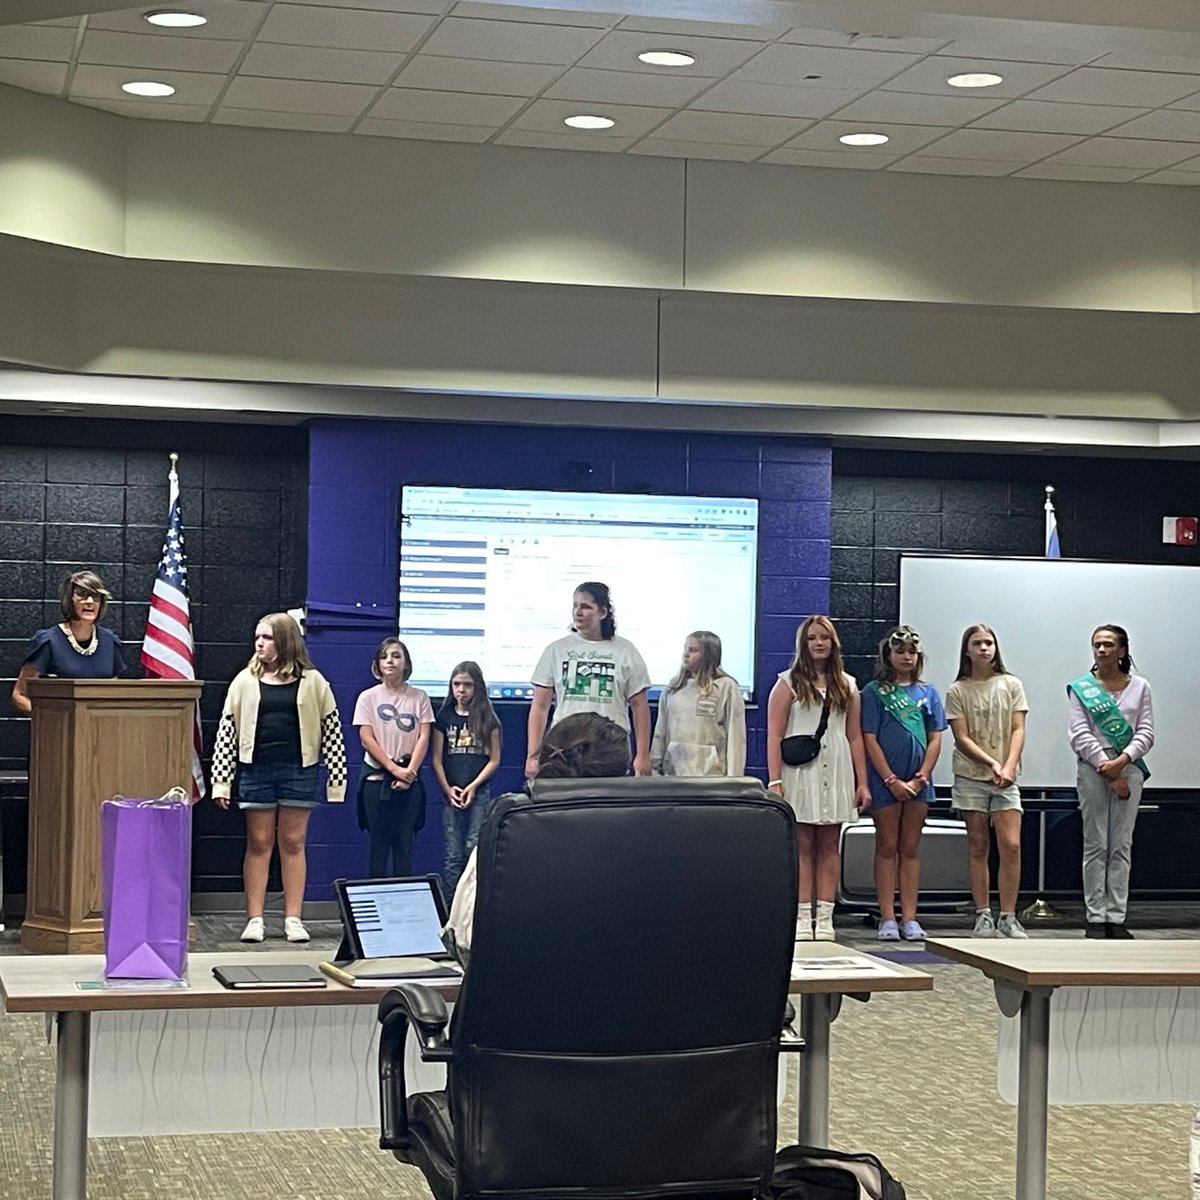 Future middle school pirates recognized at tonight’s board meeting! #gamechangers